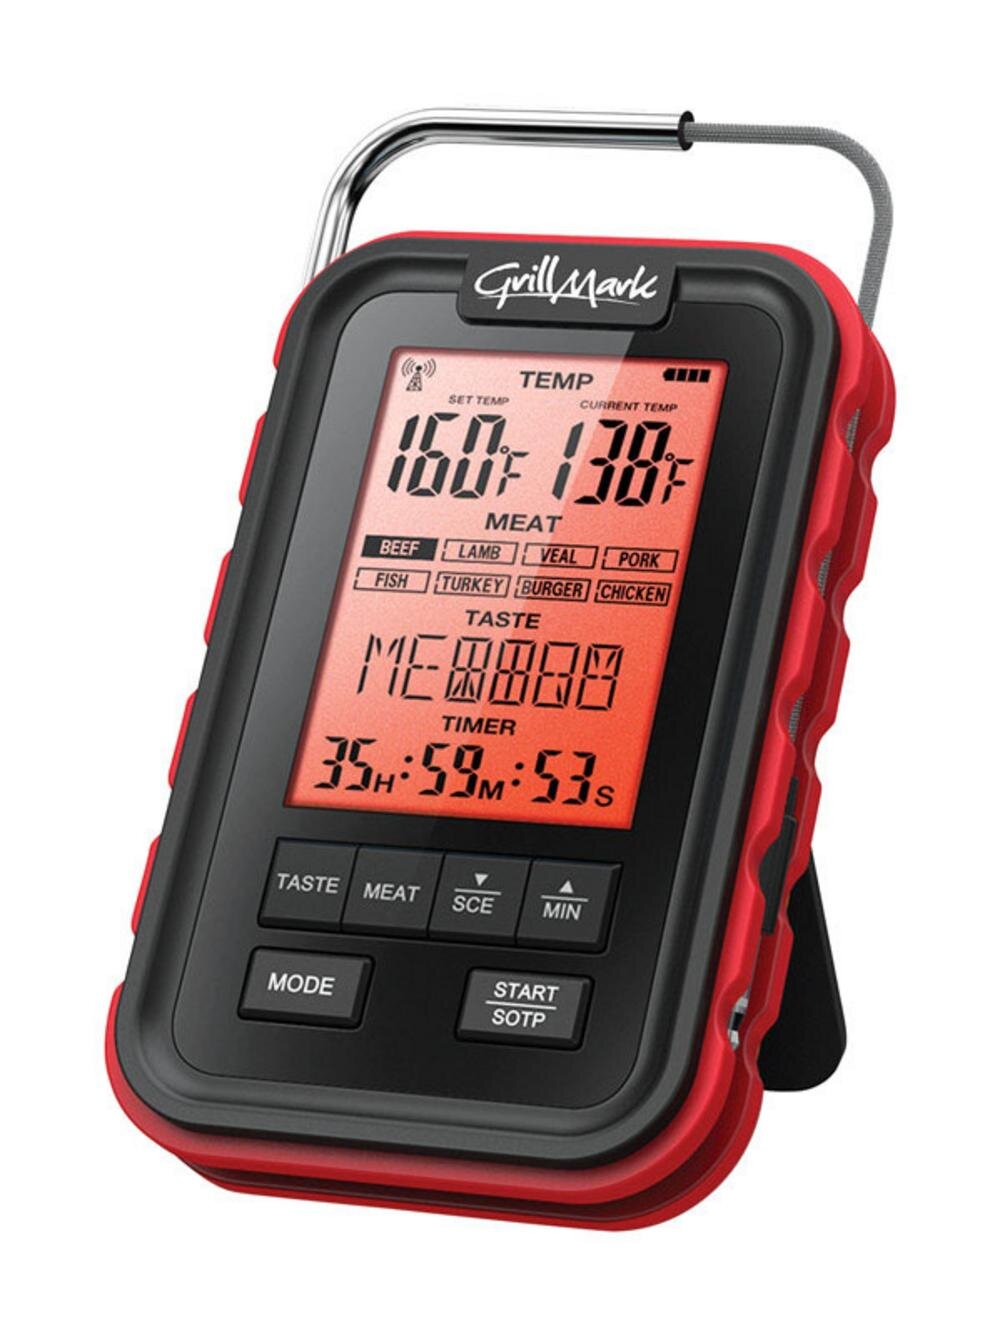 GrillMark Grill Mark Instant Read Digital Meat Thermometer